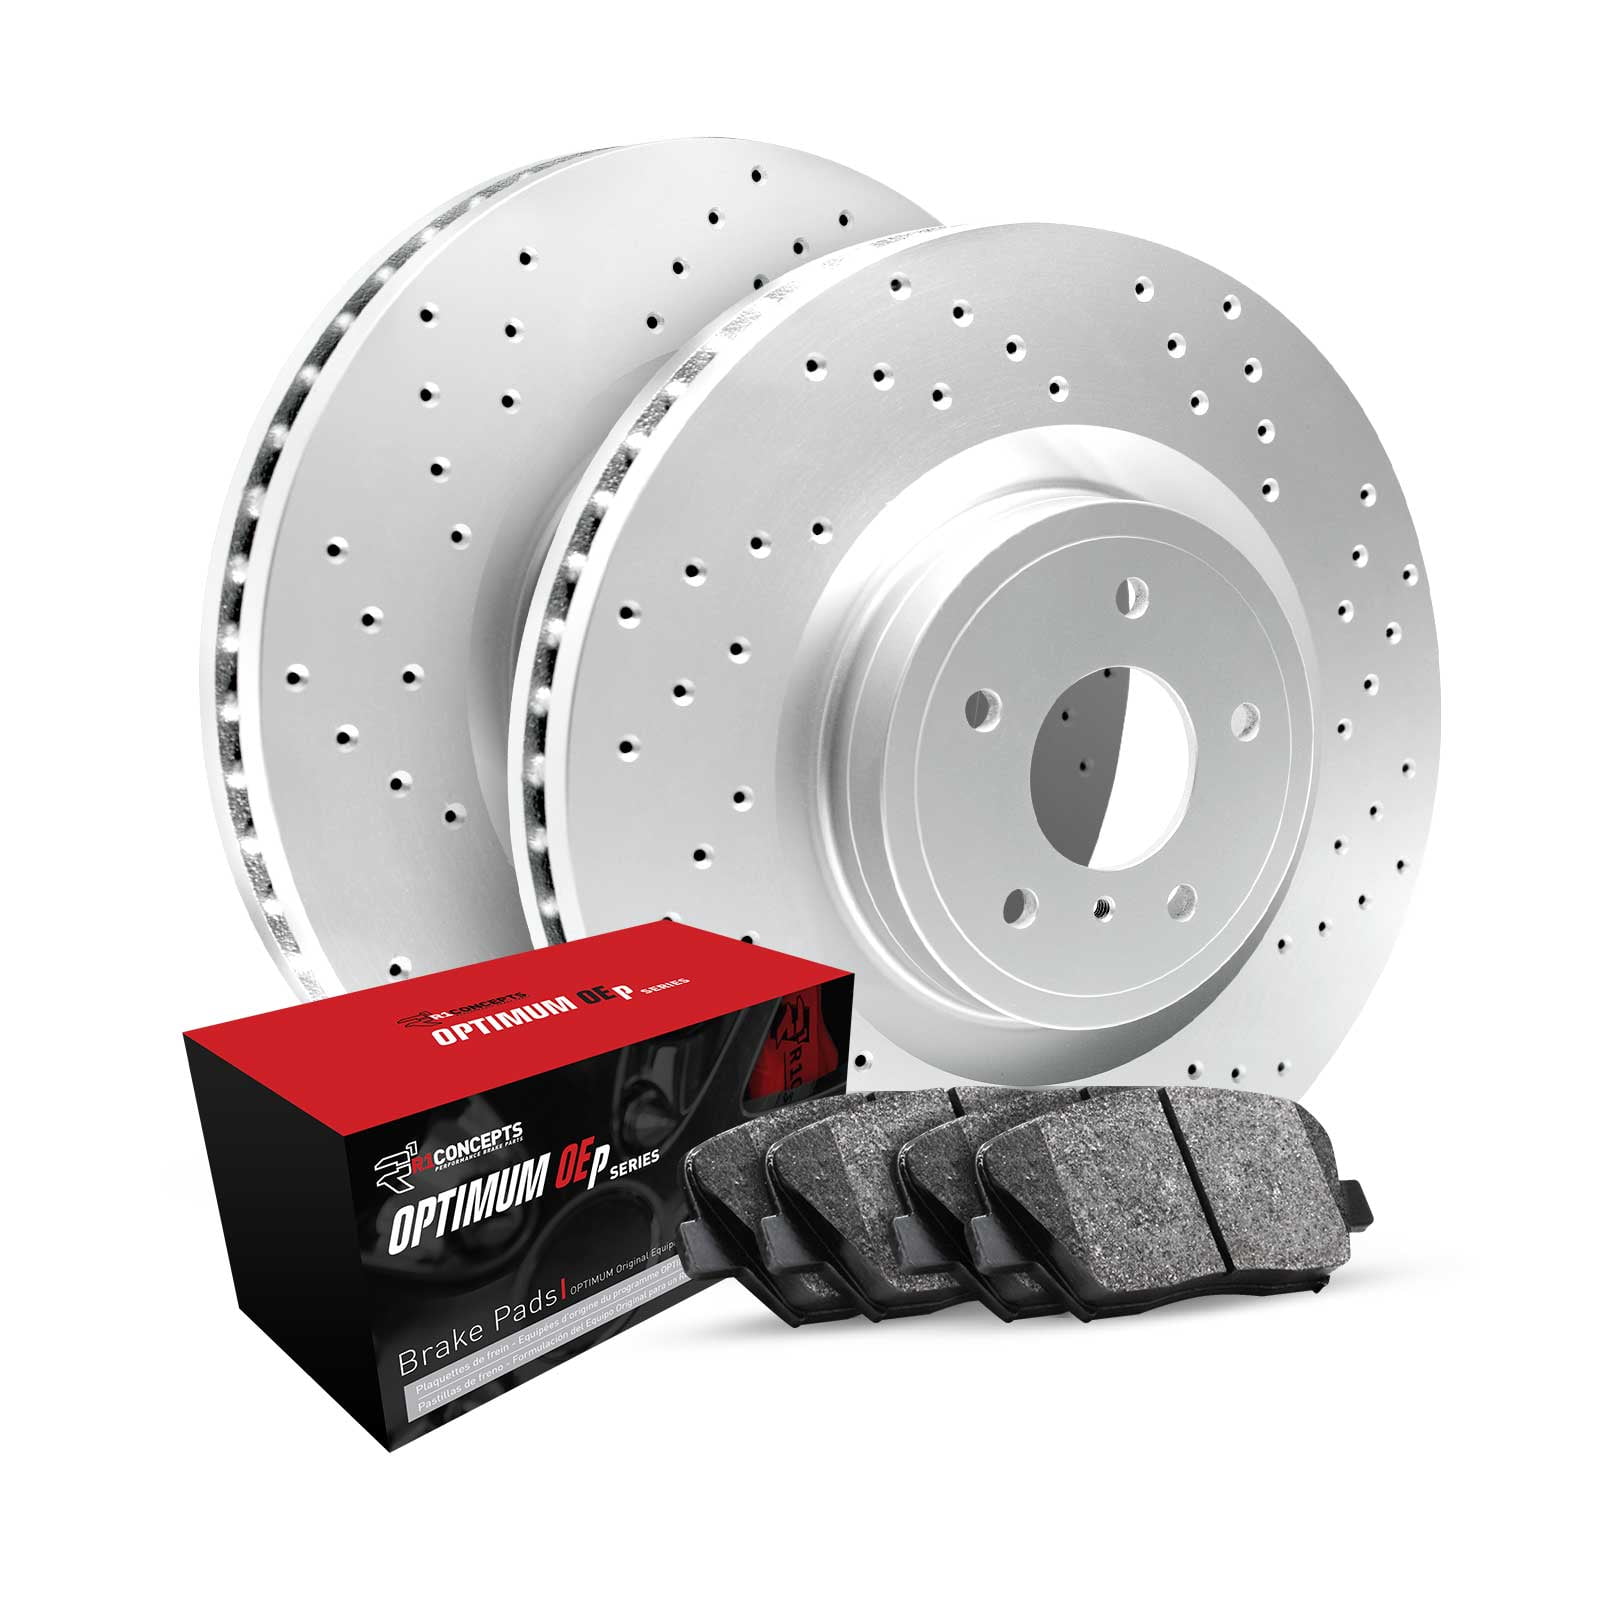 R1 Concepts Front Brakes and Rotors Kit |Front Brake Pads| Brake Rotors and  Pads| Optimum OEp Brake Pads and Rotors|fits 2004-2006 Suzuki XL-7